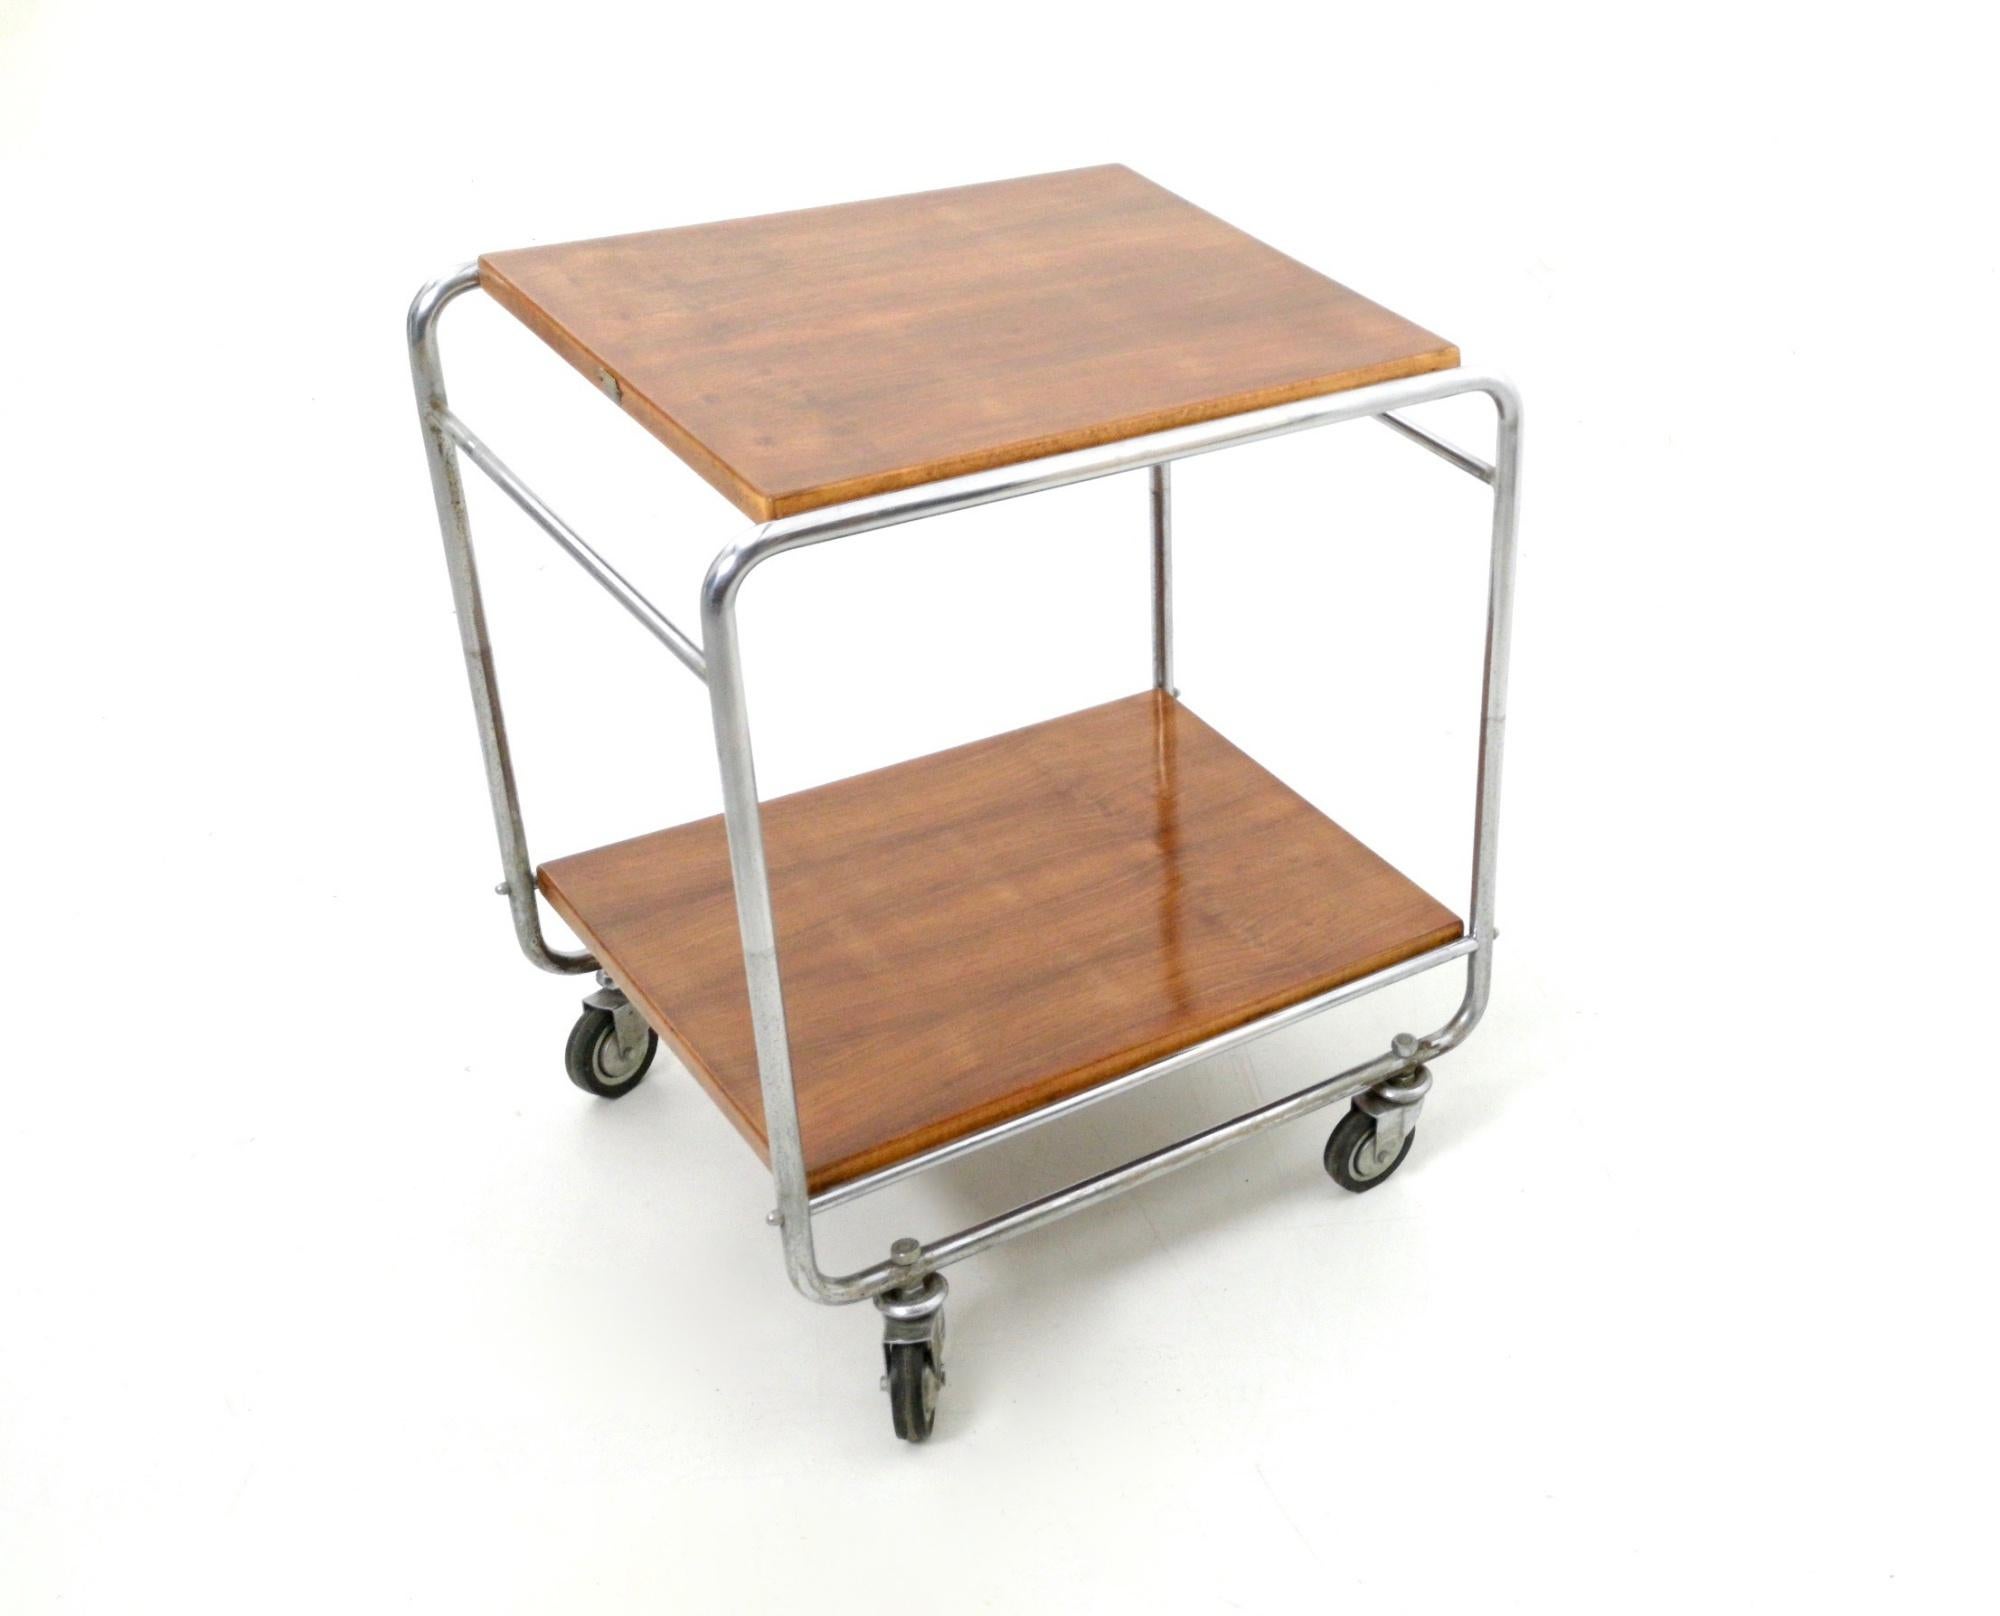 Minimalist Walnut and Nickel-Plated Metal Serving Cart Produced by Cova, Italy, 1940s